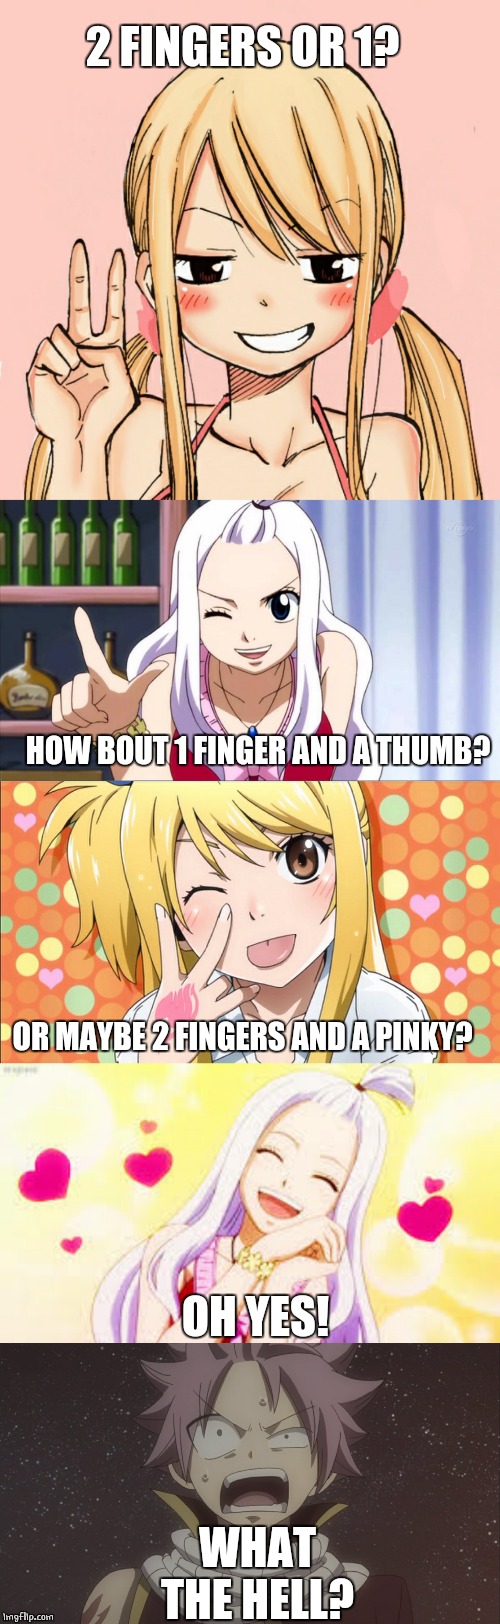 WHAT'S GOING ON? | 2 FINGERS OR 1? HOW BOUT 1 FINGER AND A THUMB? OR MAYBE 2 FINGERS AND A PINKY? OH YES! WHAT THE HELL? | image tagged in fairy tail,lucy,mirajane,natsu fairytail,anime,memes | made w/ Imgflip meme maker